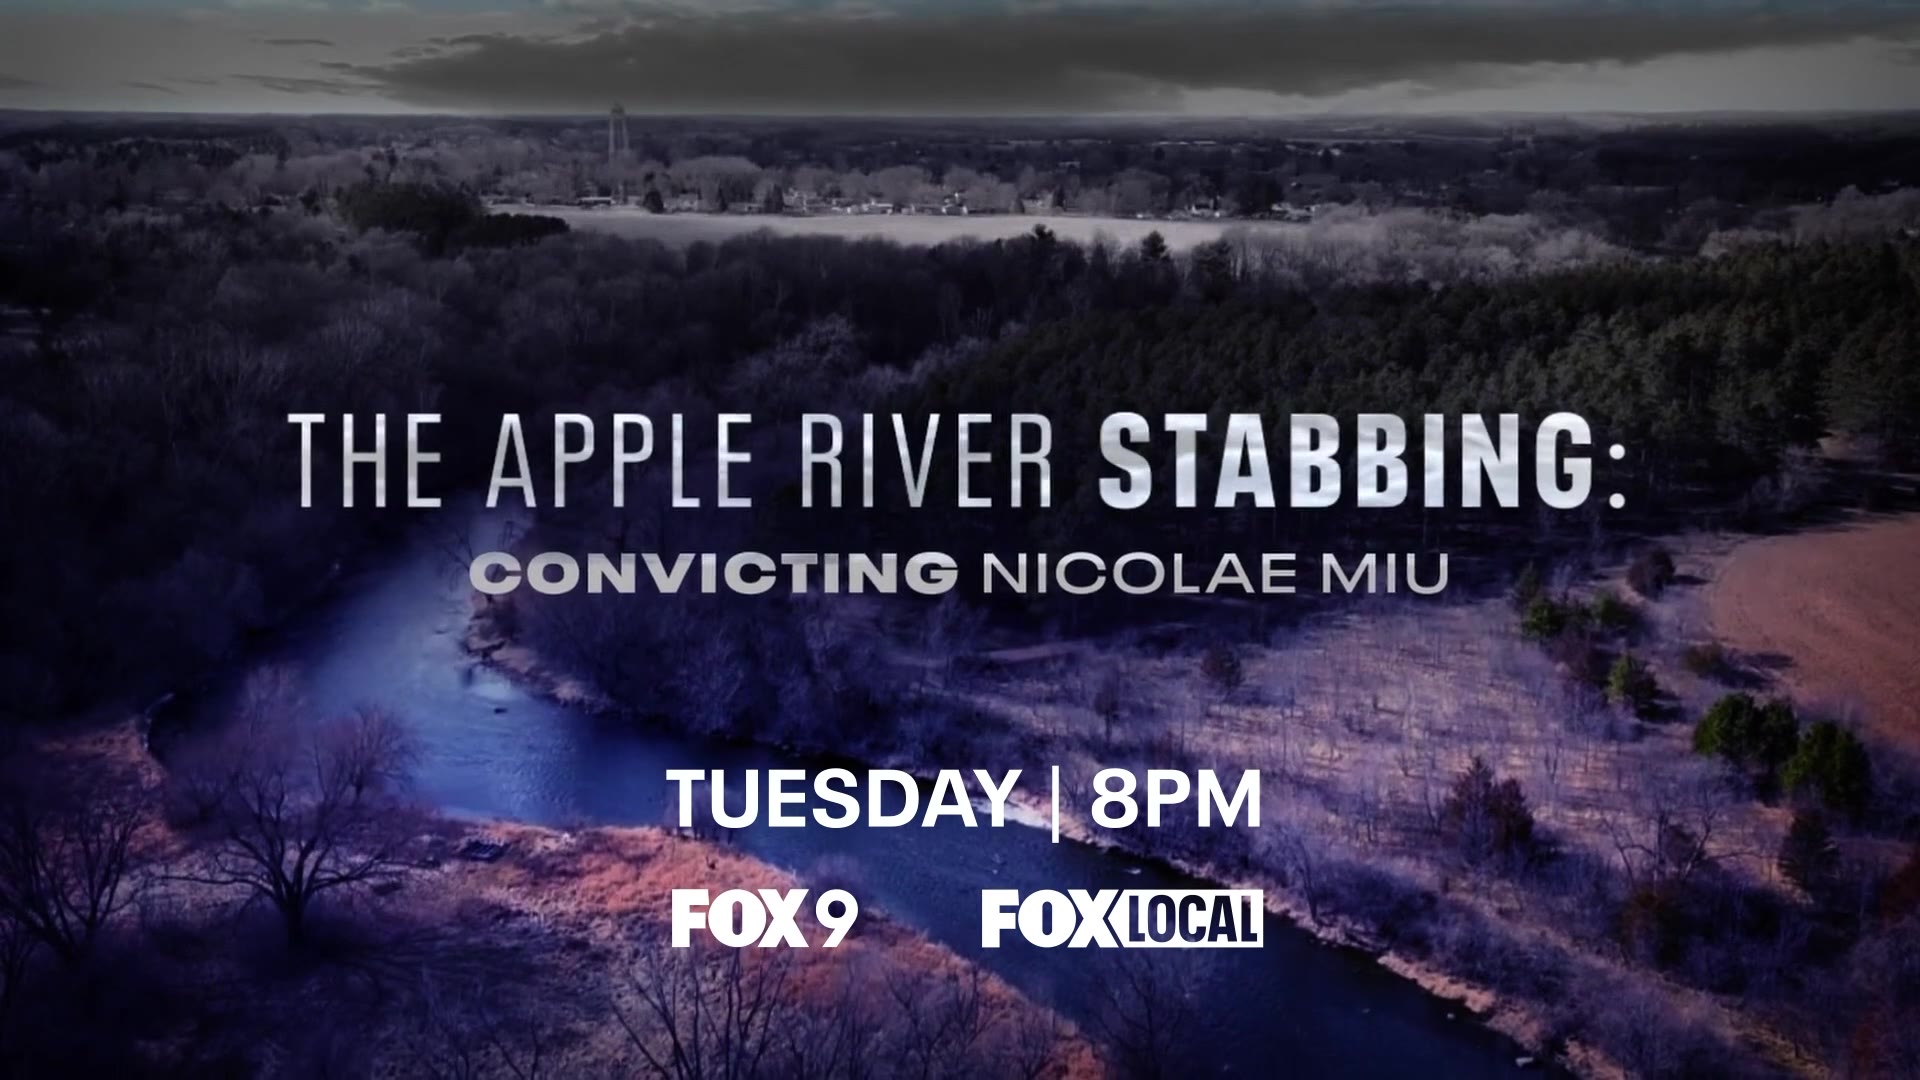 FOX 9 to air Apple River stabbing documentary